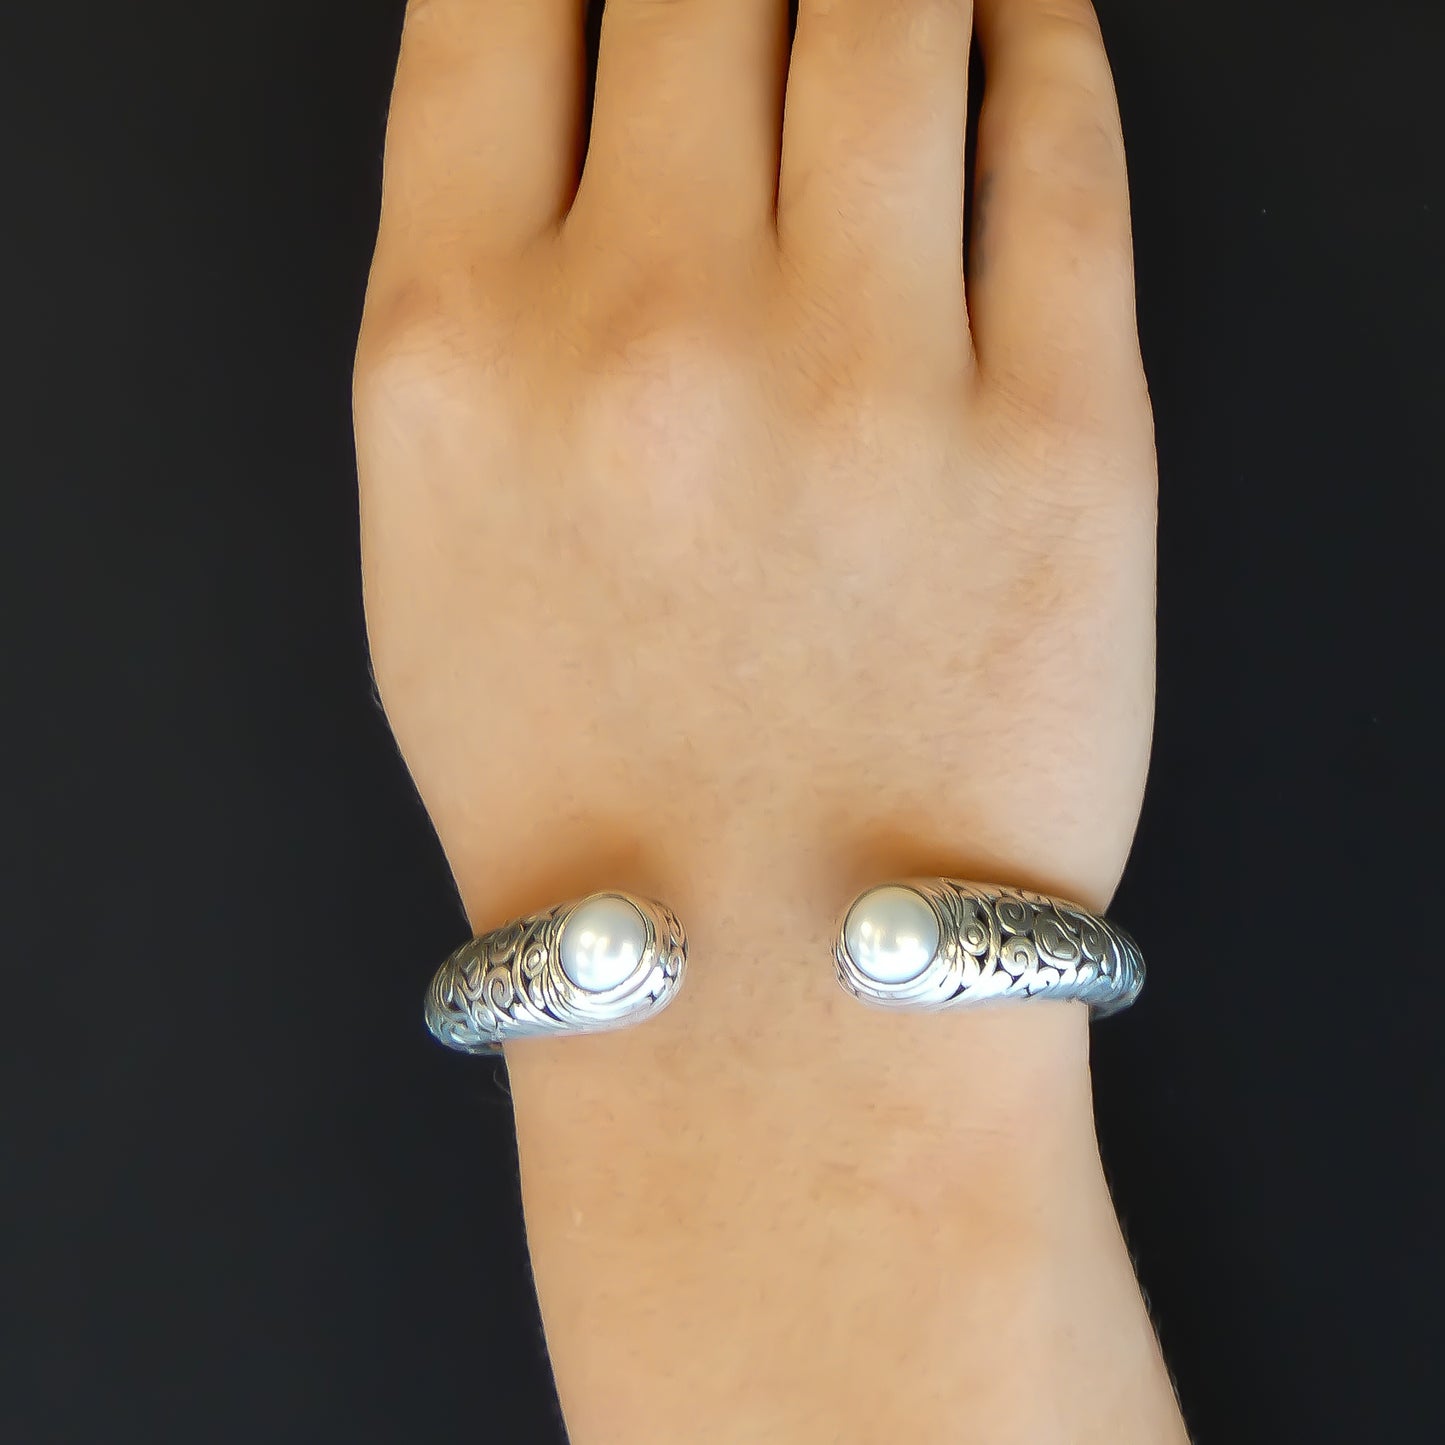 Woman wearing Hinged silver cuff bracelet with carved filigree design and two pearls.